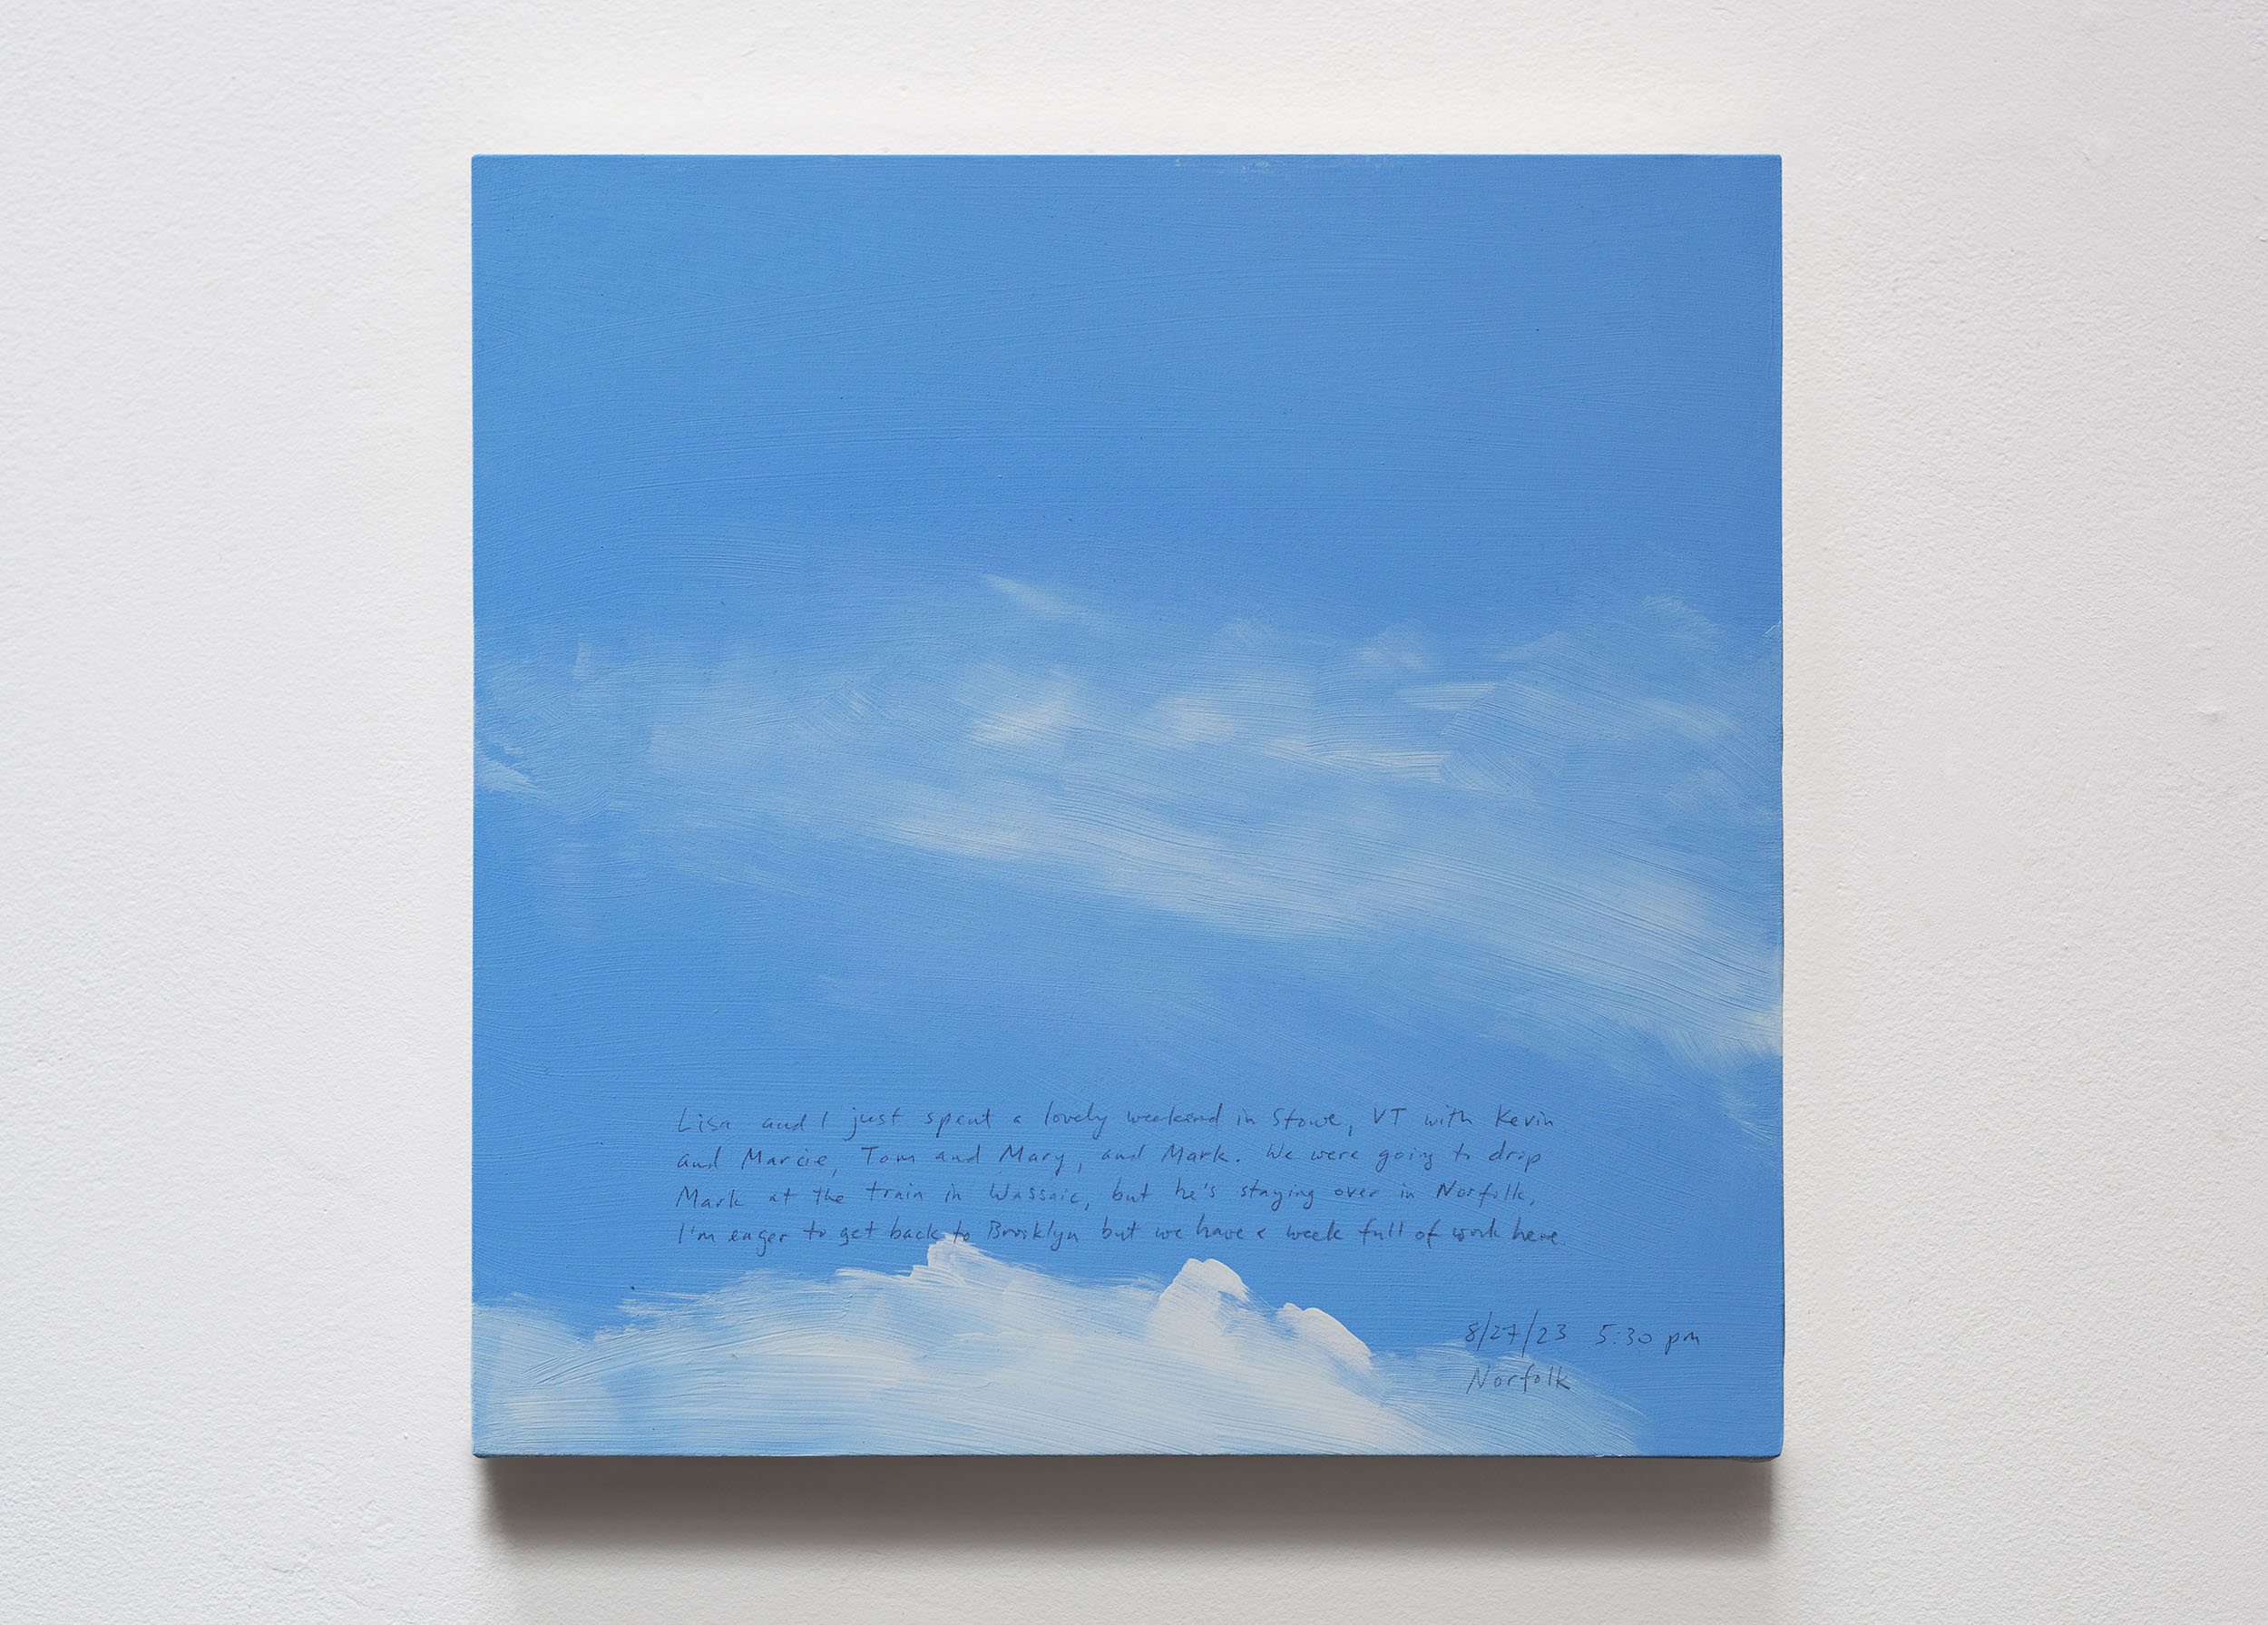 A 14 × 14 inch, acrylic painting of the sky. A journal entry is handwritten on the painting:

“Lisa and I just spent a lovely weekend in Stowe, VT with Kevin and Marcie, Tom and Mary, and Mark. We were going to drop Mark at the train in Wassaic, but he’s staying over in Norfolk. I’m really eager to get back to Brooklyn but we have a week full of work here.

8/27/23 5:30 pm
Norfolk”